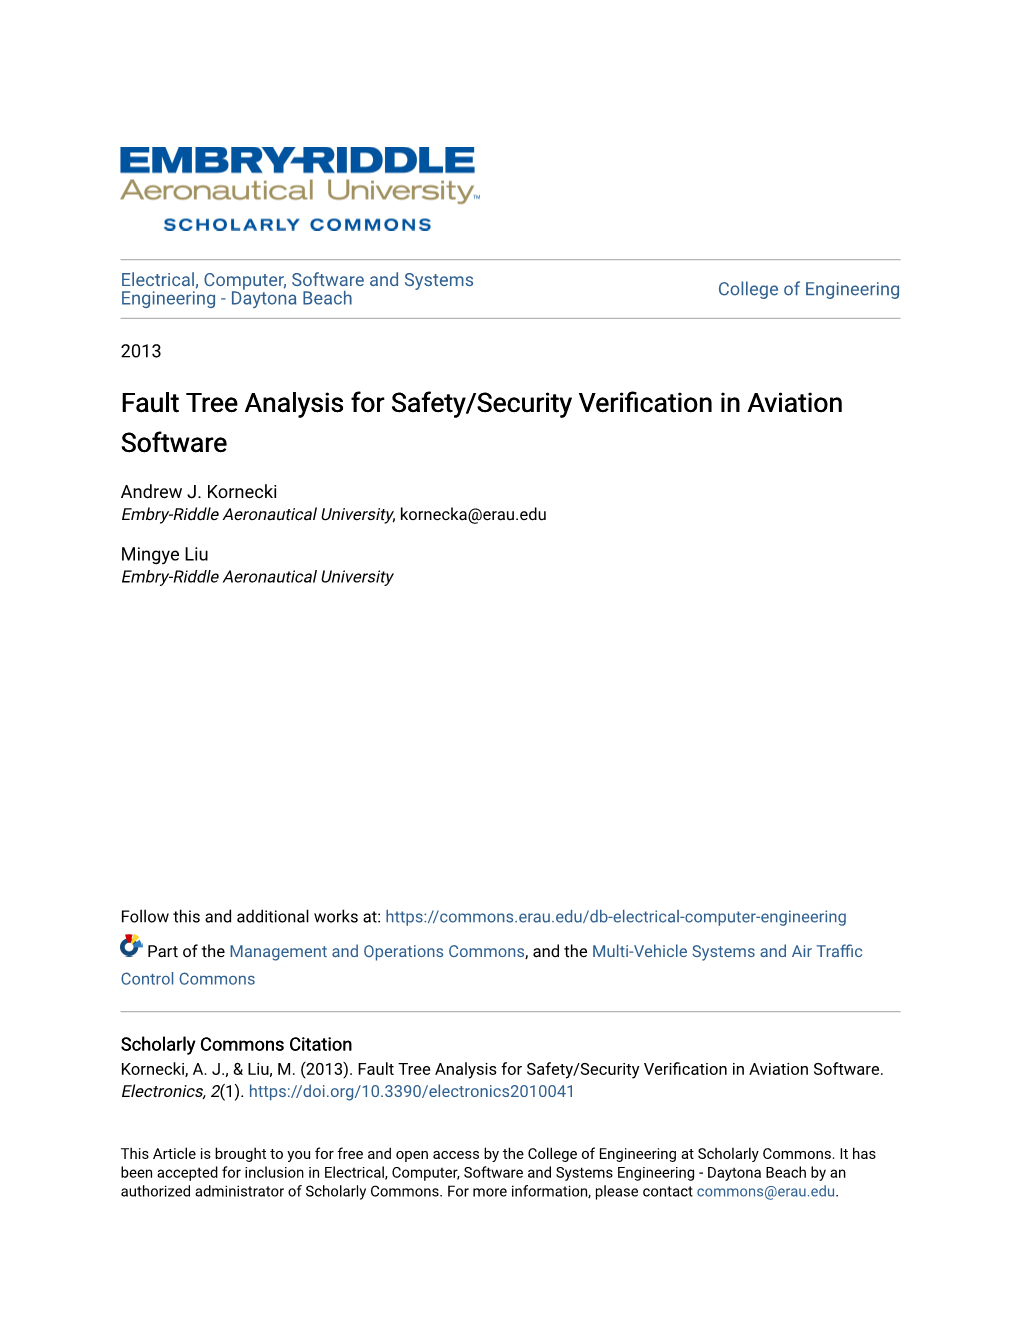 Fault Tree Analysis for Safety/Security Verification in Aviation Software